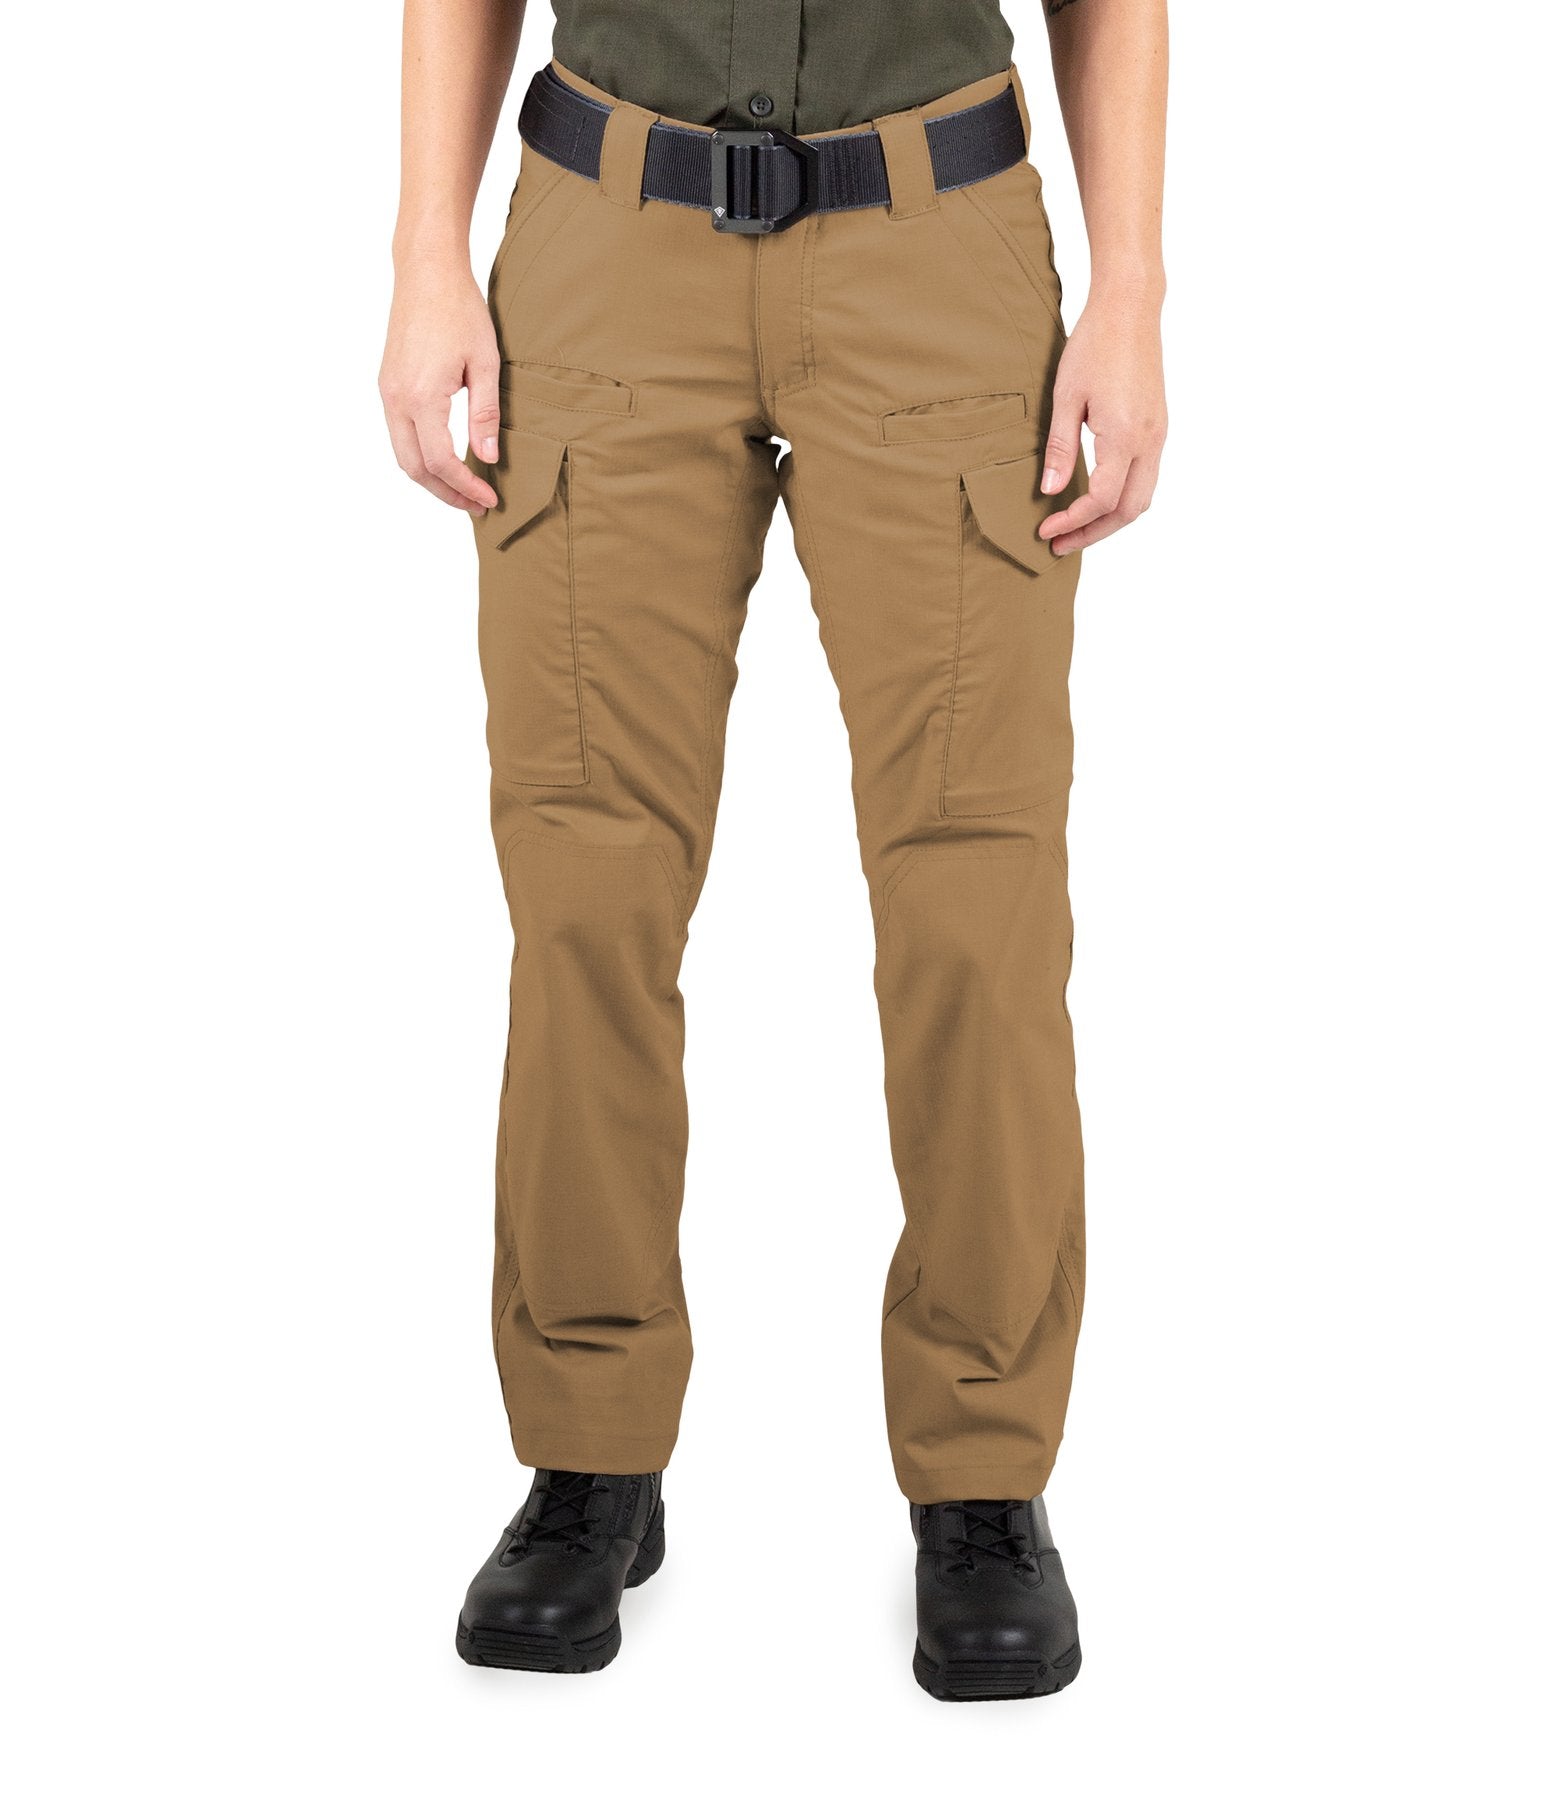 Women's Tactical Pants - Cargo Tactical Pants Designed For Women – First  Tactical